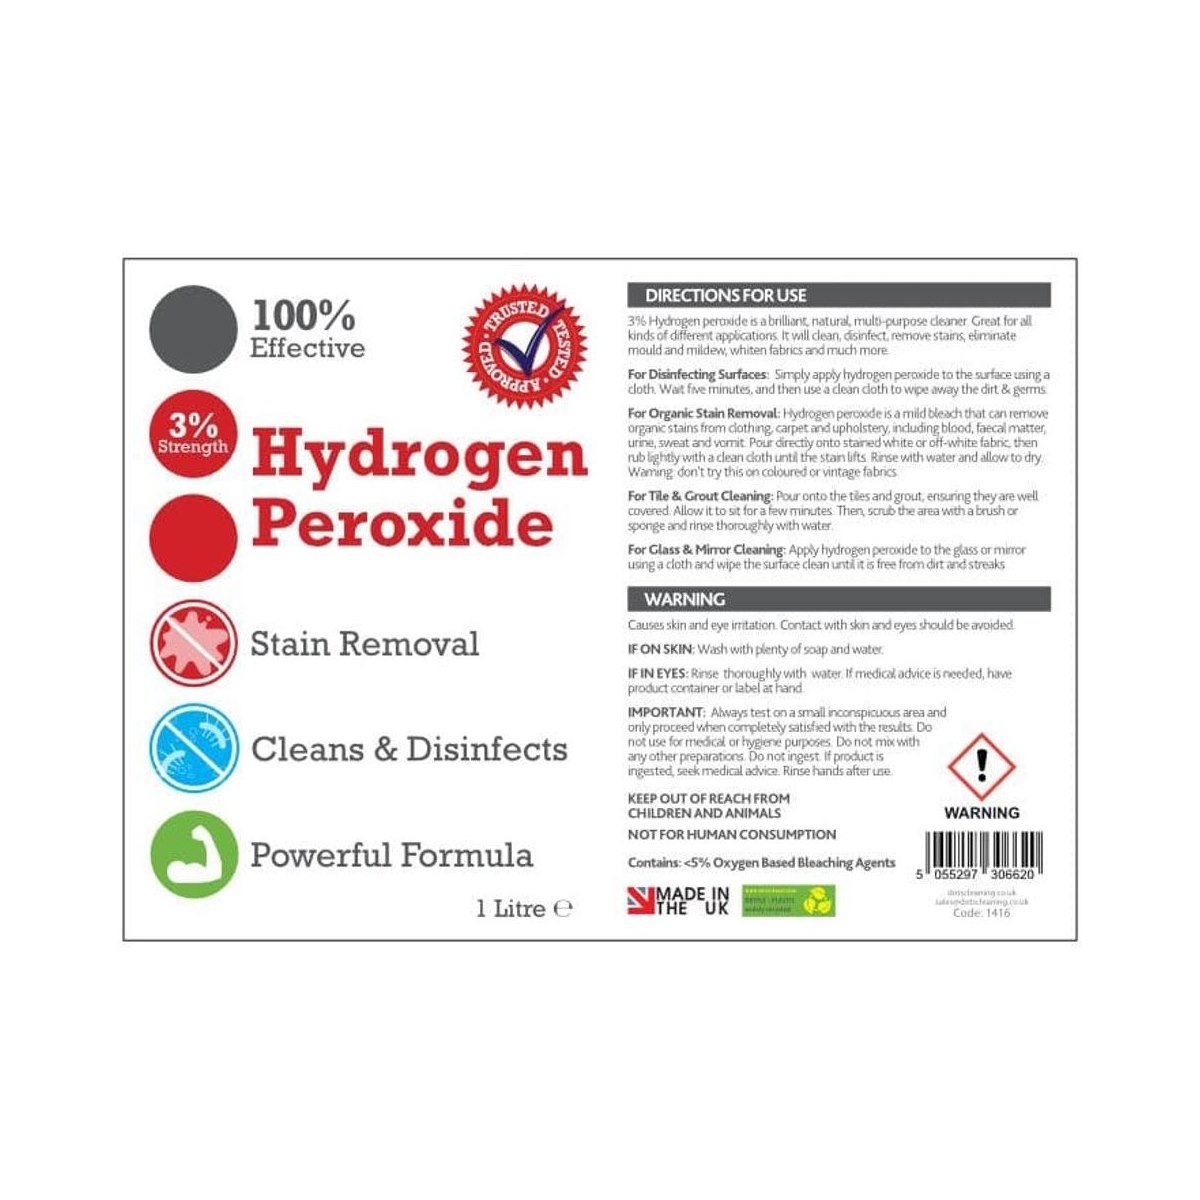 How to Use Dots Hydrogen Peroxide 3% 1L